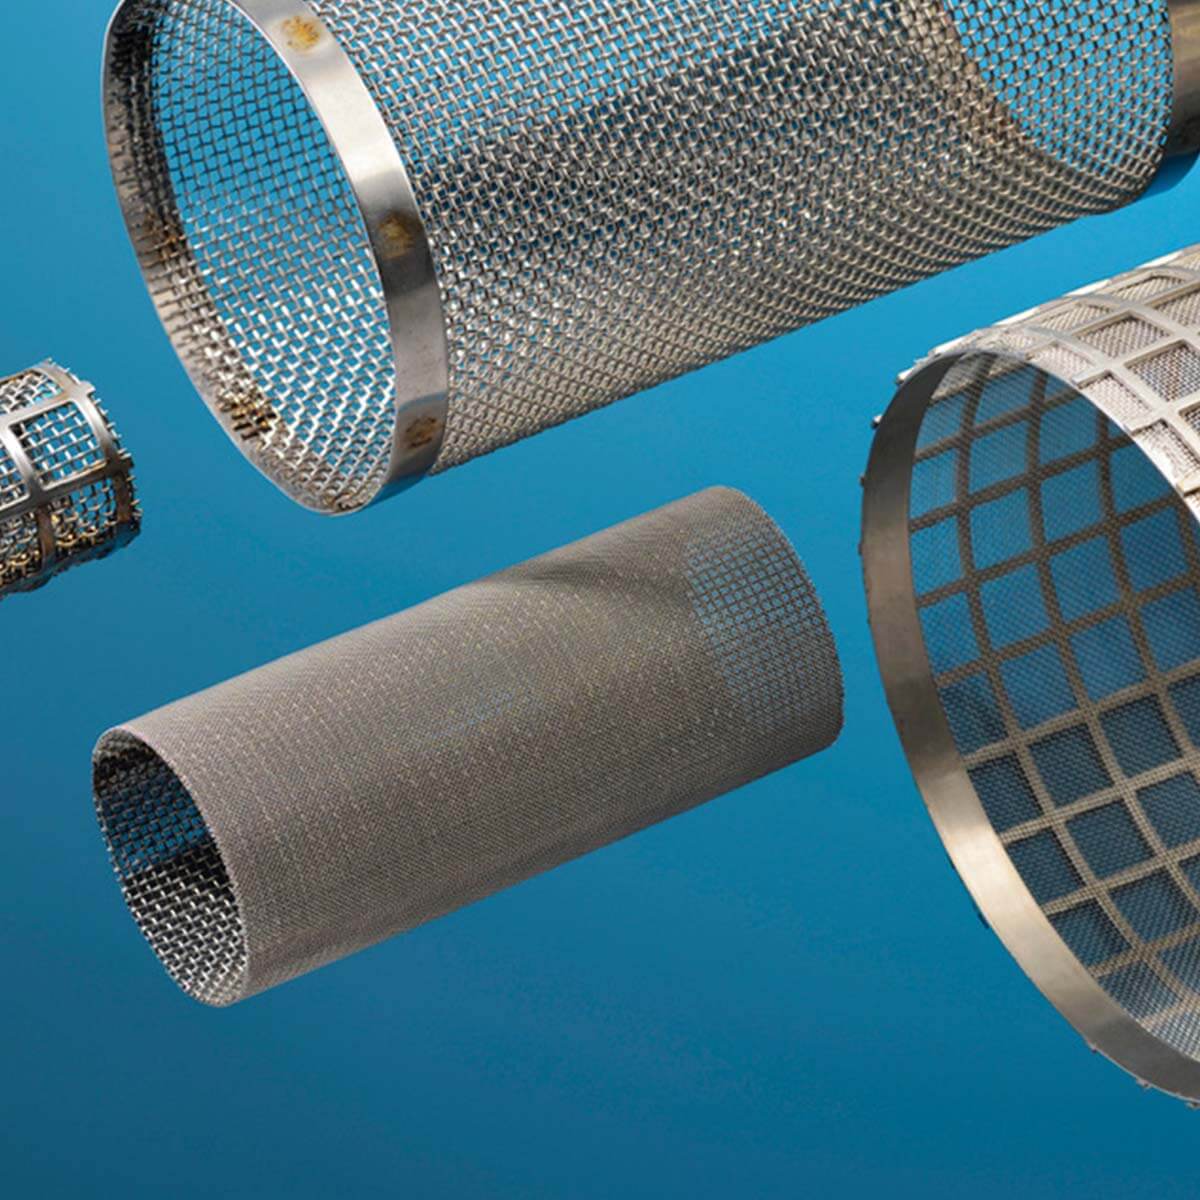 Cylindrical filters